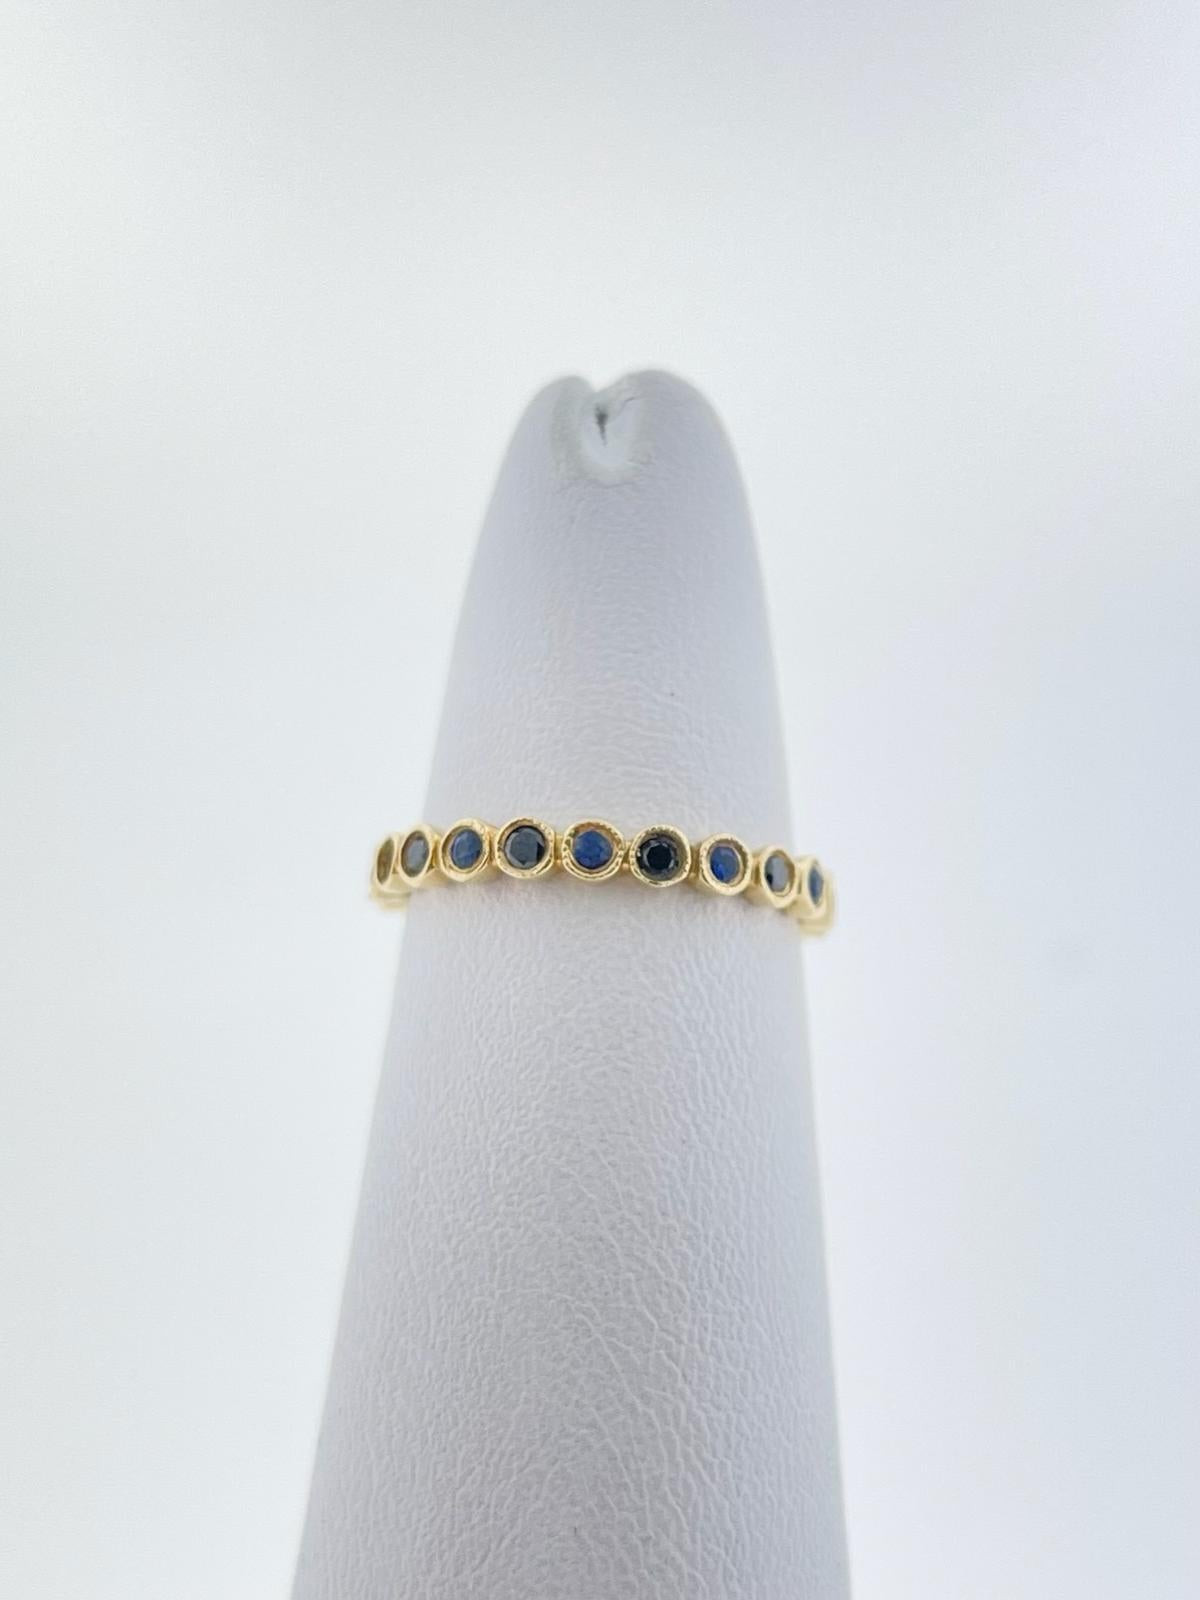 This eternity band is set in 14K Yellow Gold with alternating blue sapphire and black diamond stones. There is a total of Ten (10) Round Blue Sapphires weighing 0.17ctw and Eleven (11) Round Black Diamonds weighing 0.15ctw. 

The ring is currently